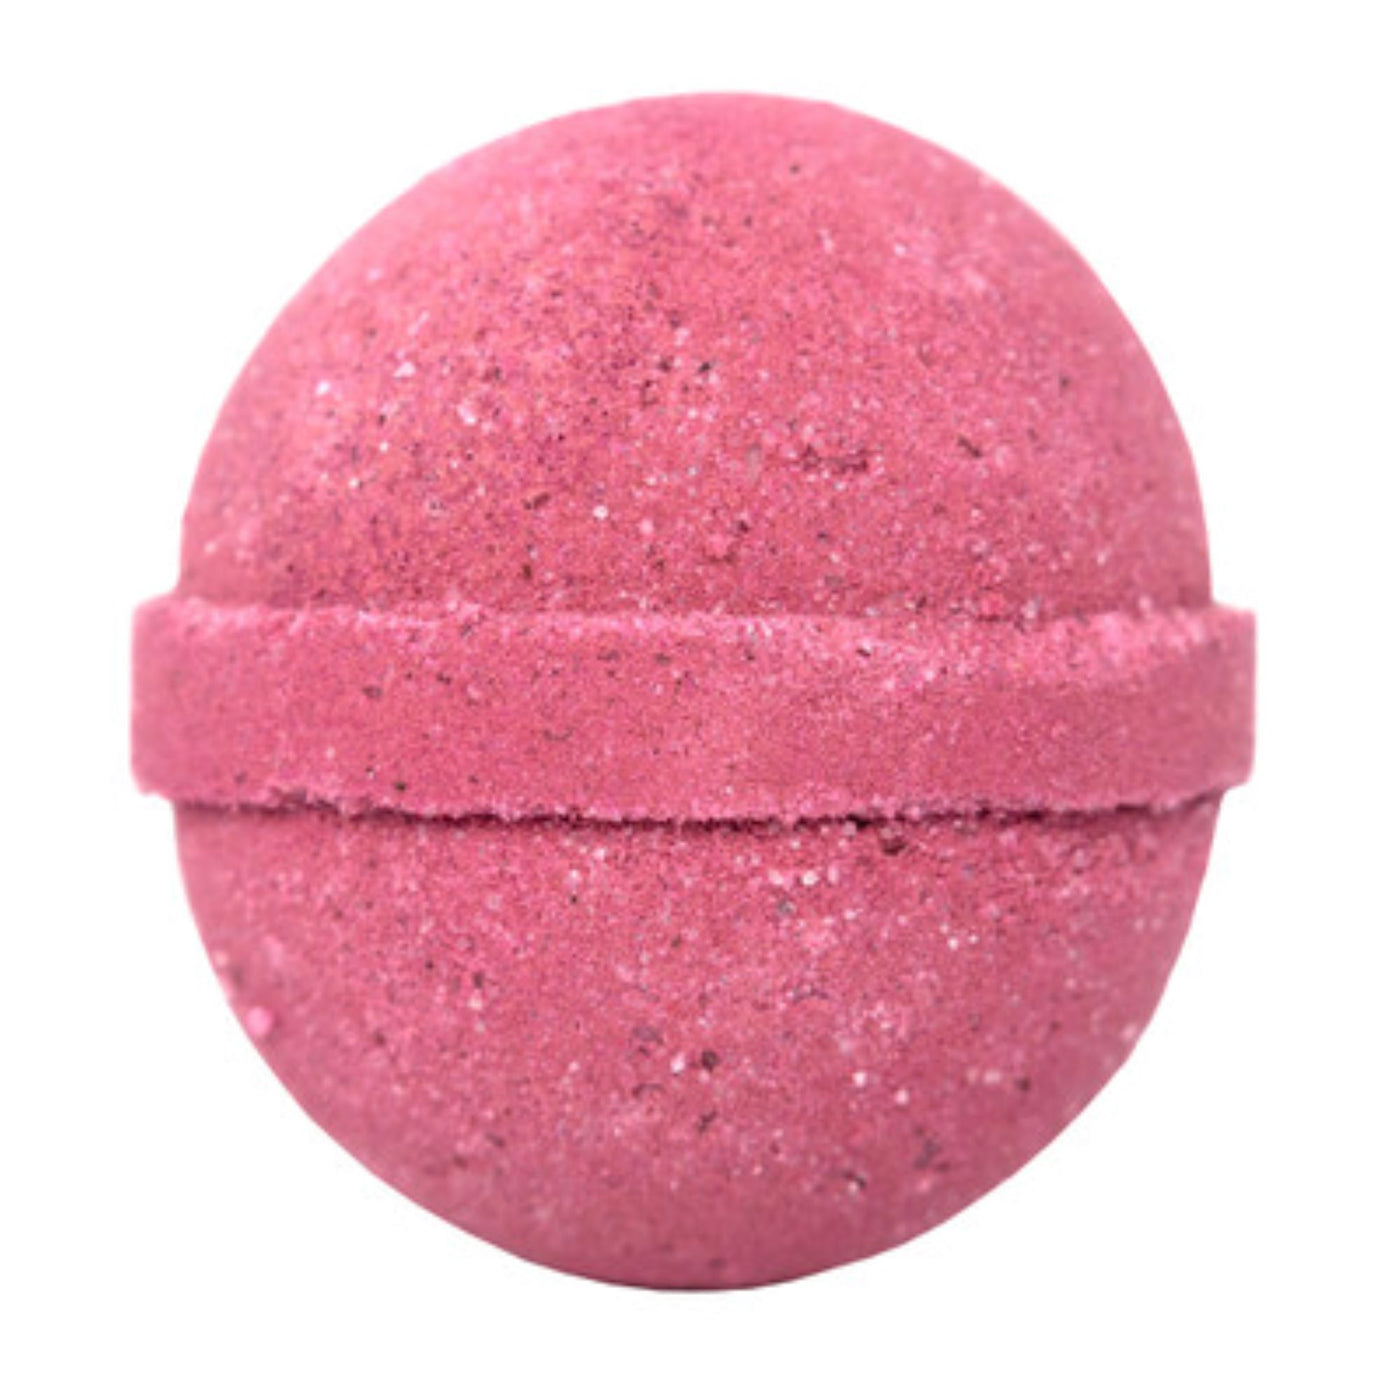 Pink Petals Bath Bomb Aromatherapy Moisturizing Relaxing Soothing Muscle Aches  Calming Mood Lifting Sweet Body